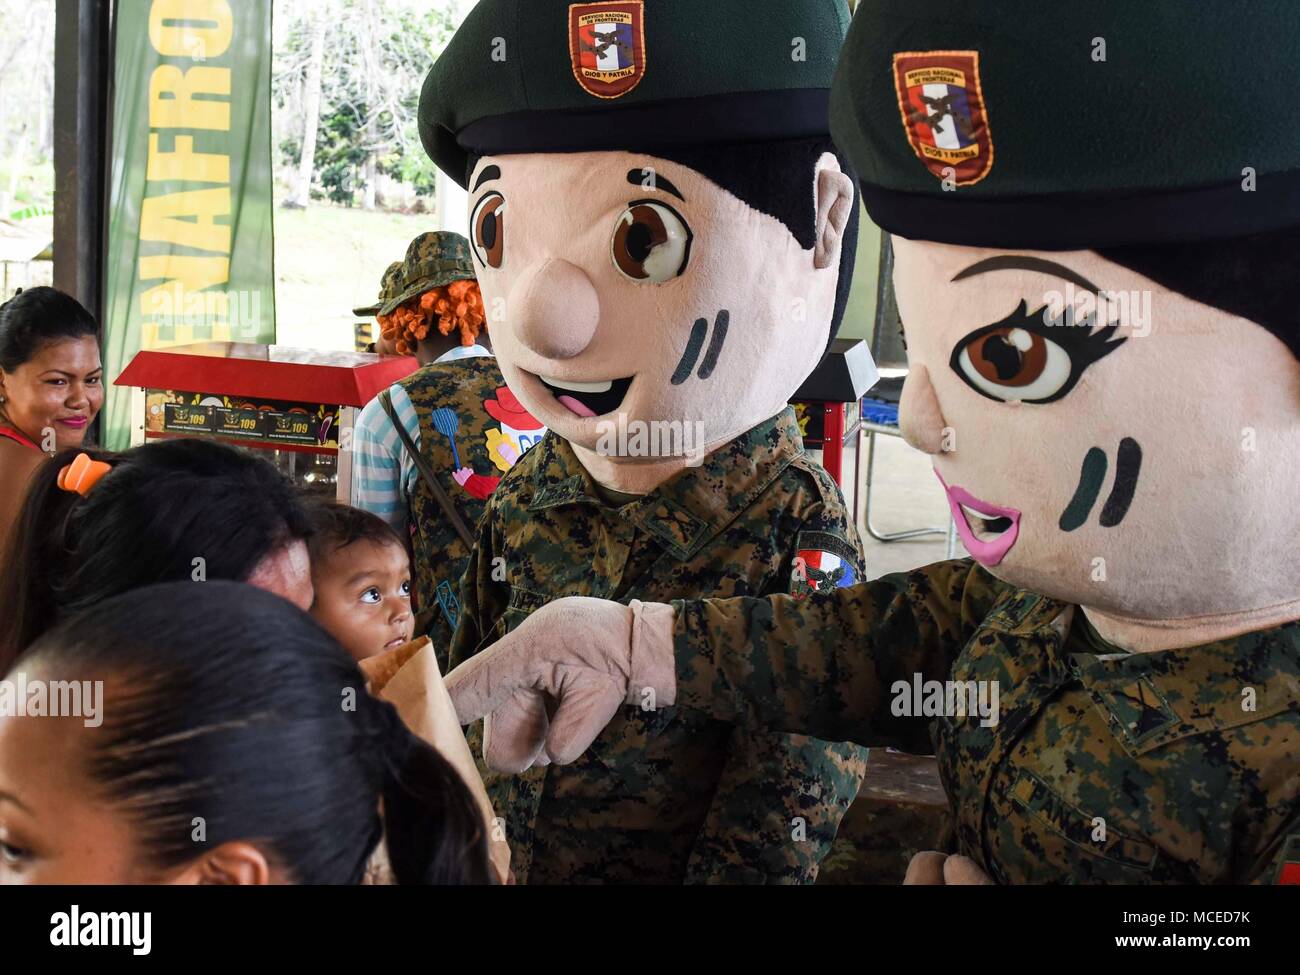 Mascots for the Panamanian National Border Service, known as SENAFRONT, greet guests at the opening ceremony of Exercise New Horizons 2018, April 11, 2018, in Meteti, Panama. The joint-service exercise will provide readiness training to U.S. military members, while also benefiting local communities throughout the country. During the exercise, U.S. military members will build three schools, one community center and a women’s health ward in the Meteti area. They will also work closely with Panamanian health providers bringing medical aid to people in the Darien, Coclé, and Veraguas Provinces. (U Stock Photo